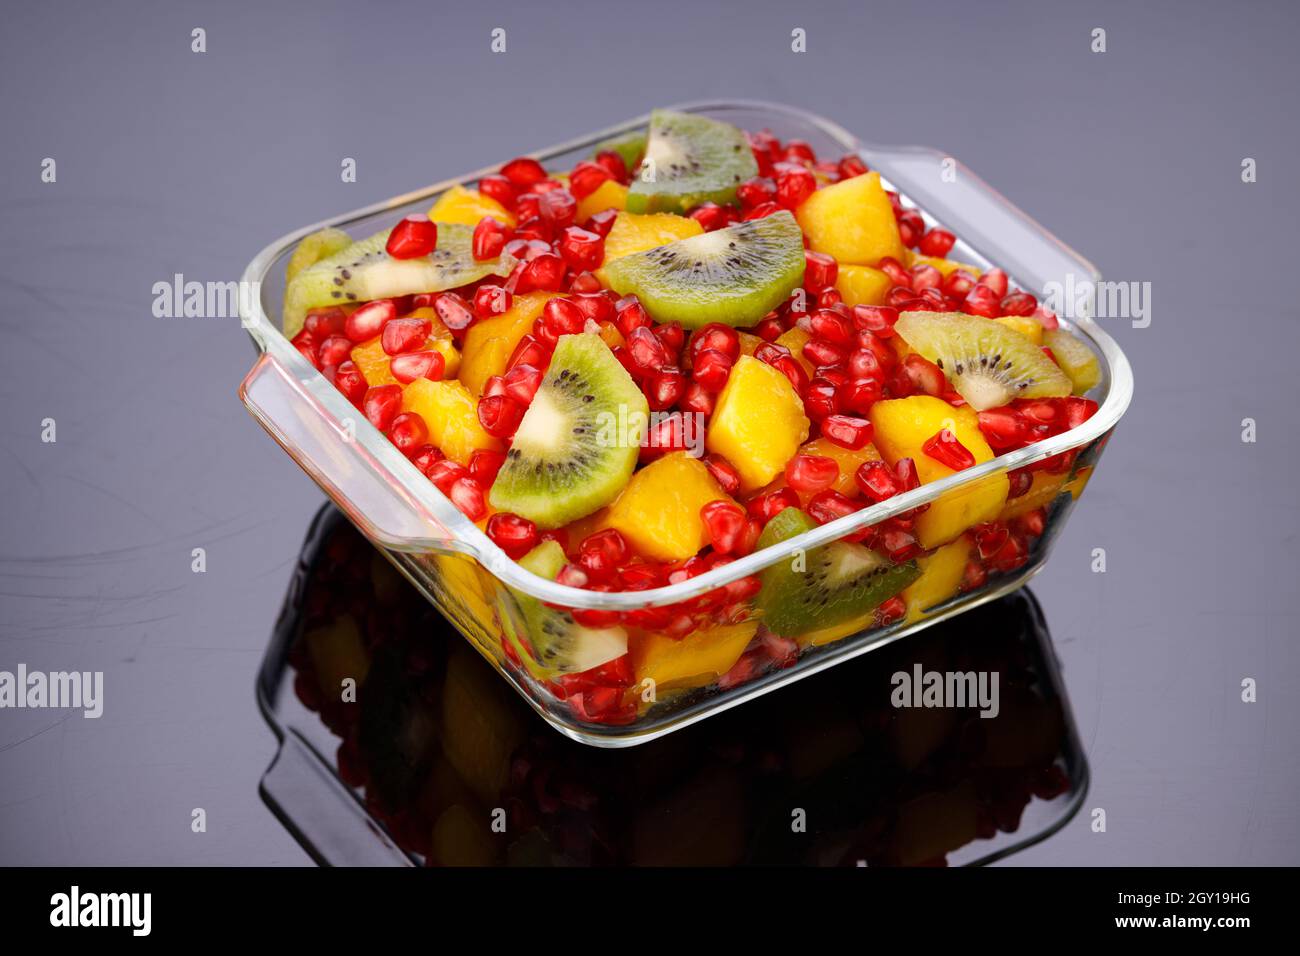 Mixed cut fruits arranged in a transparent glass bowl  with black background, isolated. Stock Photo